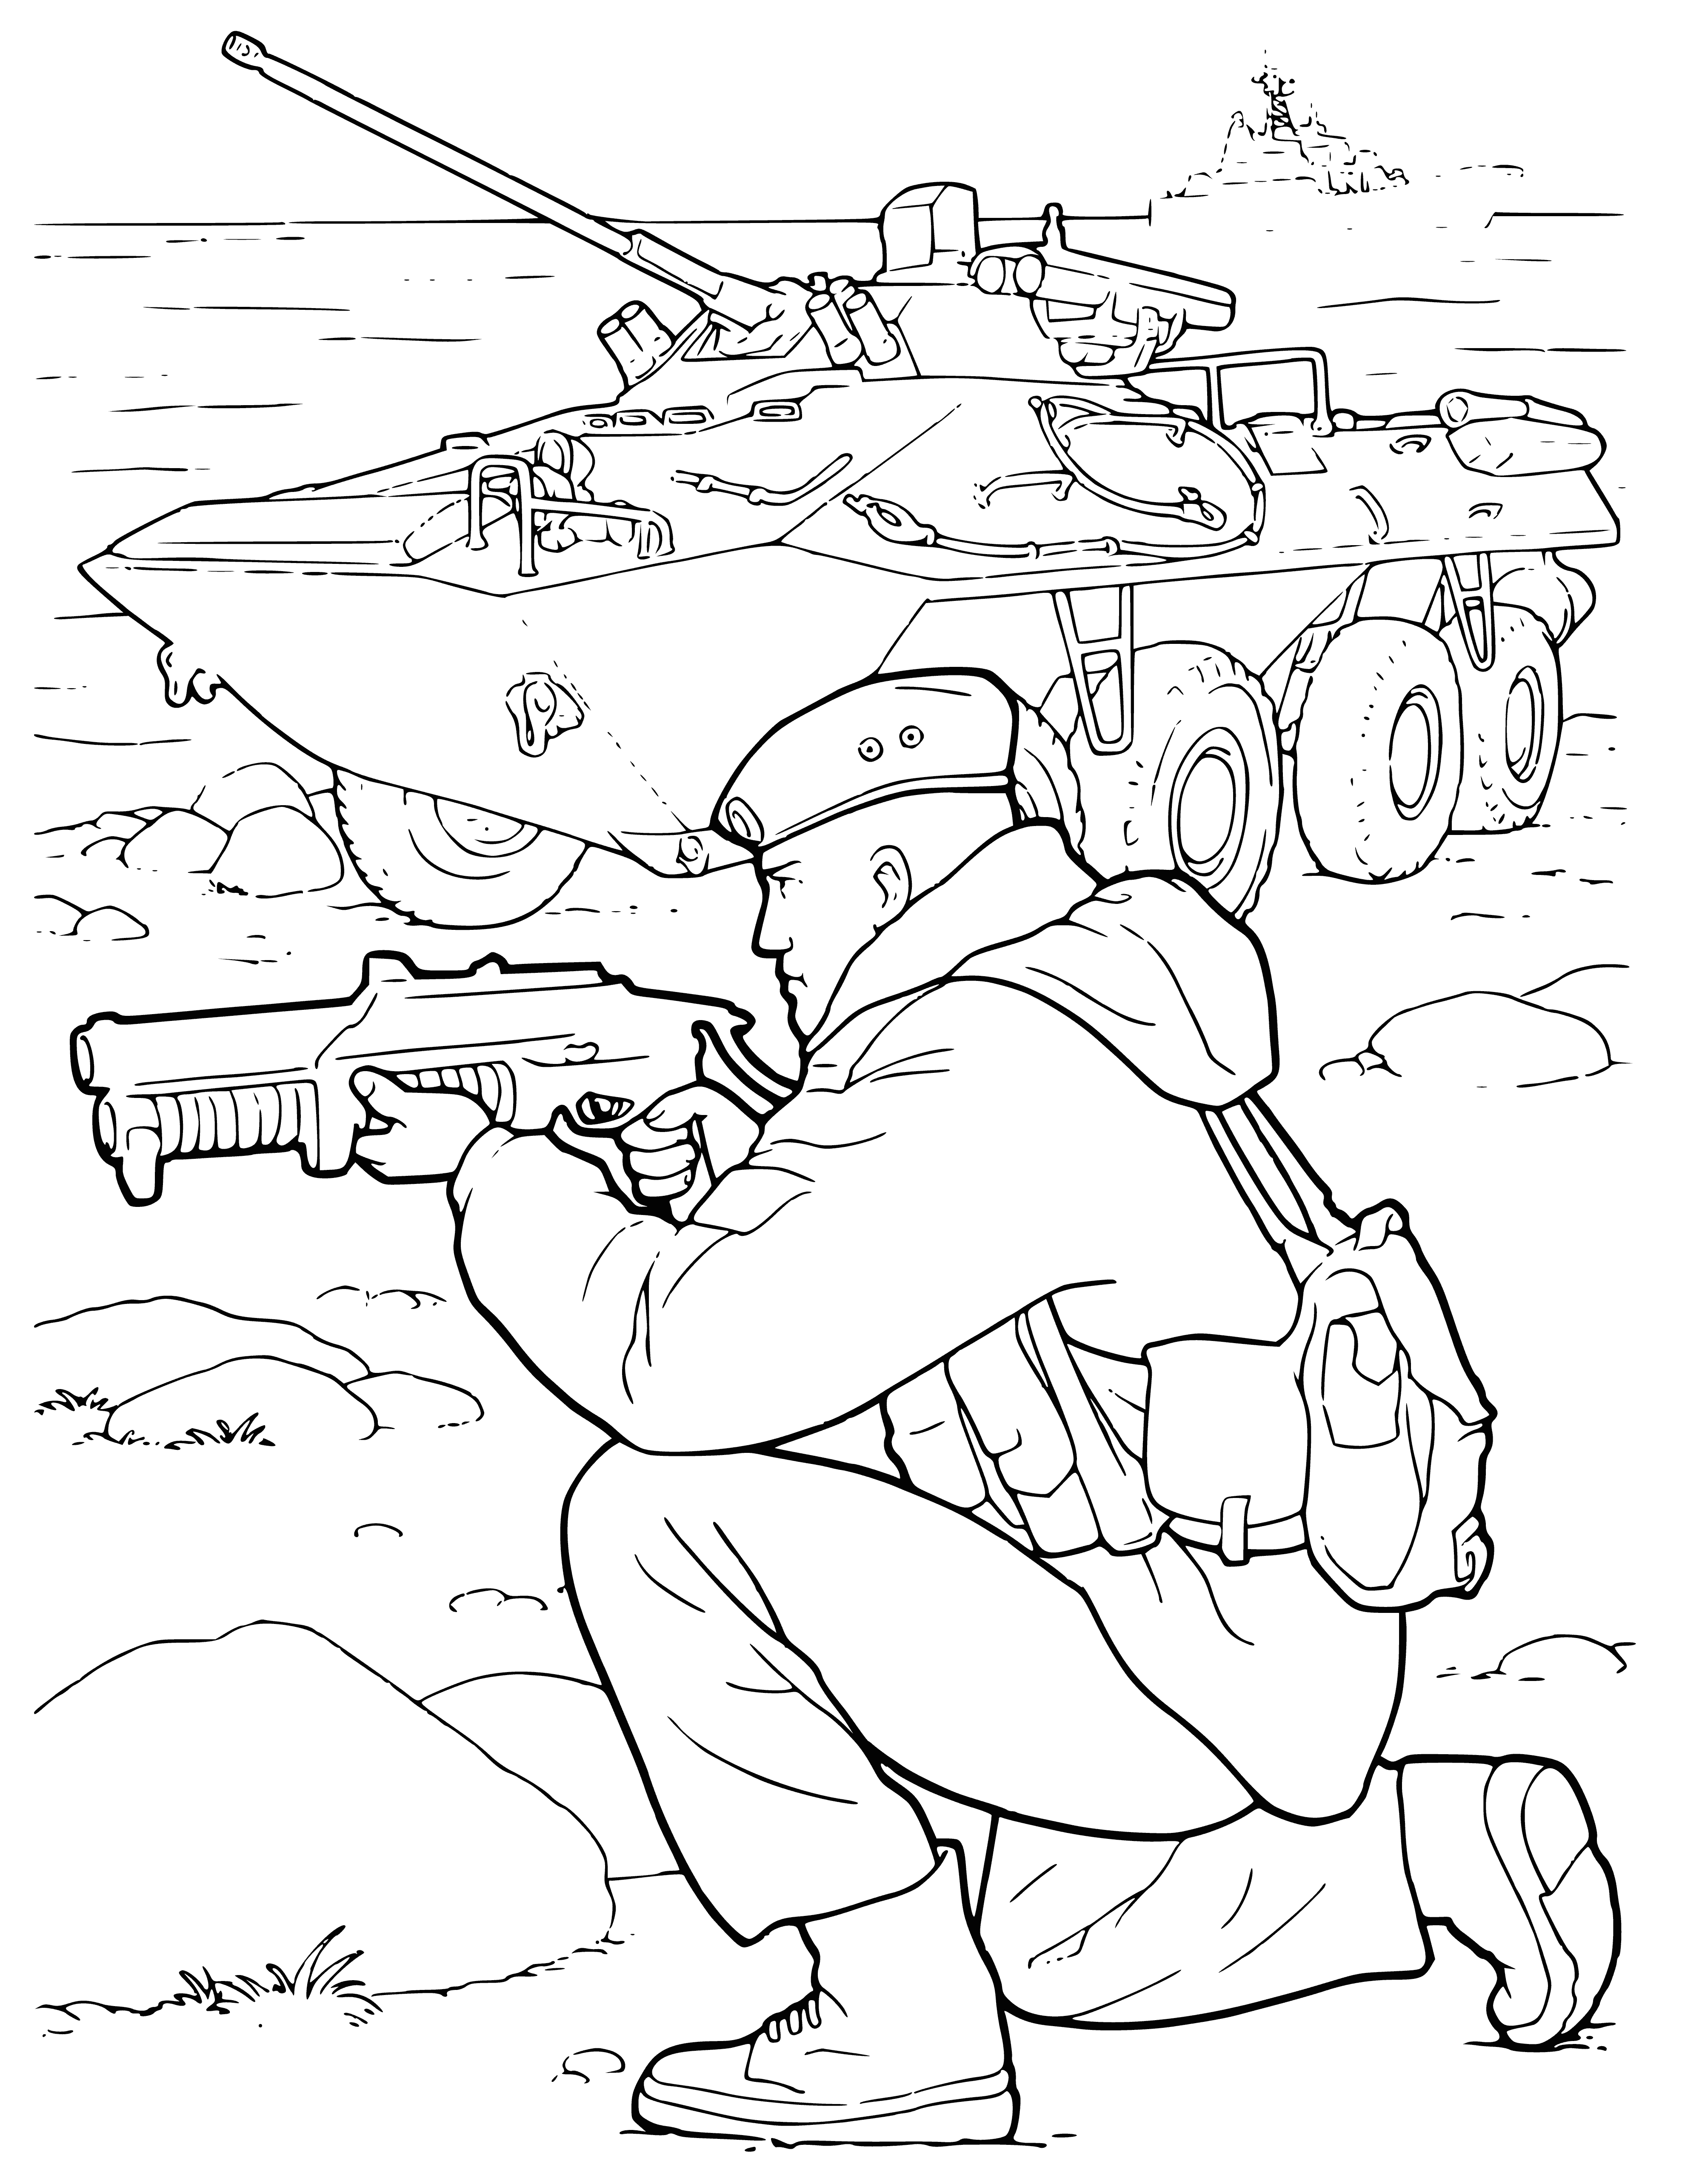 coloring page: Marine interviews woman in medical office; she's seated, smiling; he's standing, writing in notebook. #marine #woman #medical